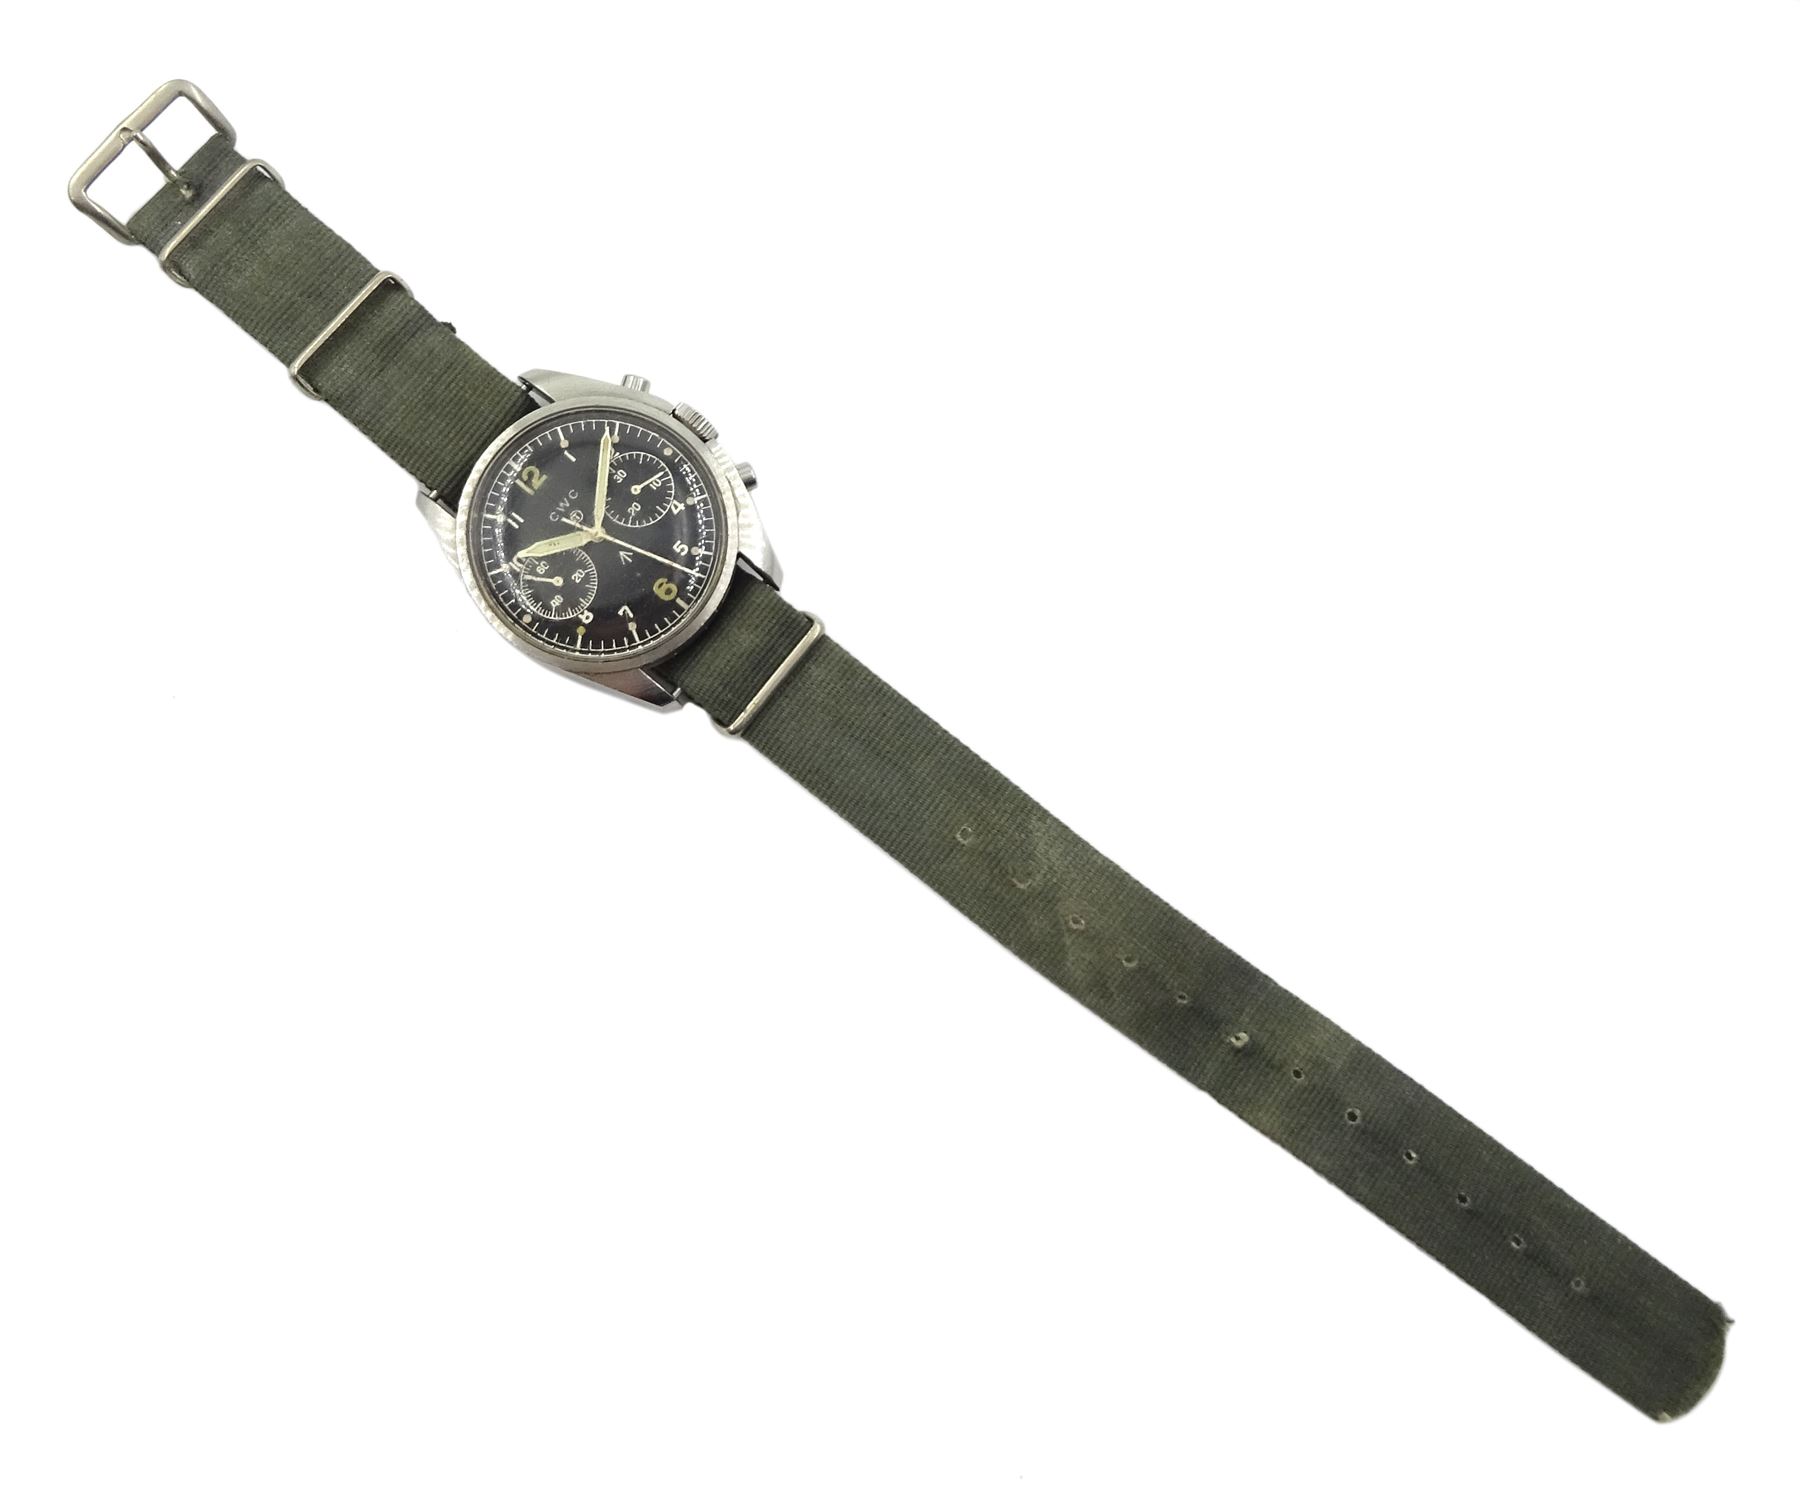 CWC British military Royal Navy 17 jewels chronograph wristwatch dated 1975 - Image 2 of 4